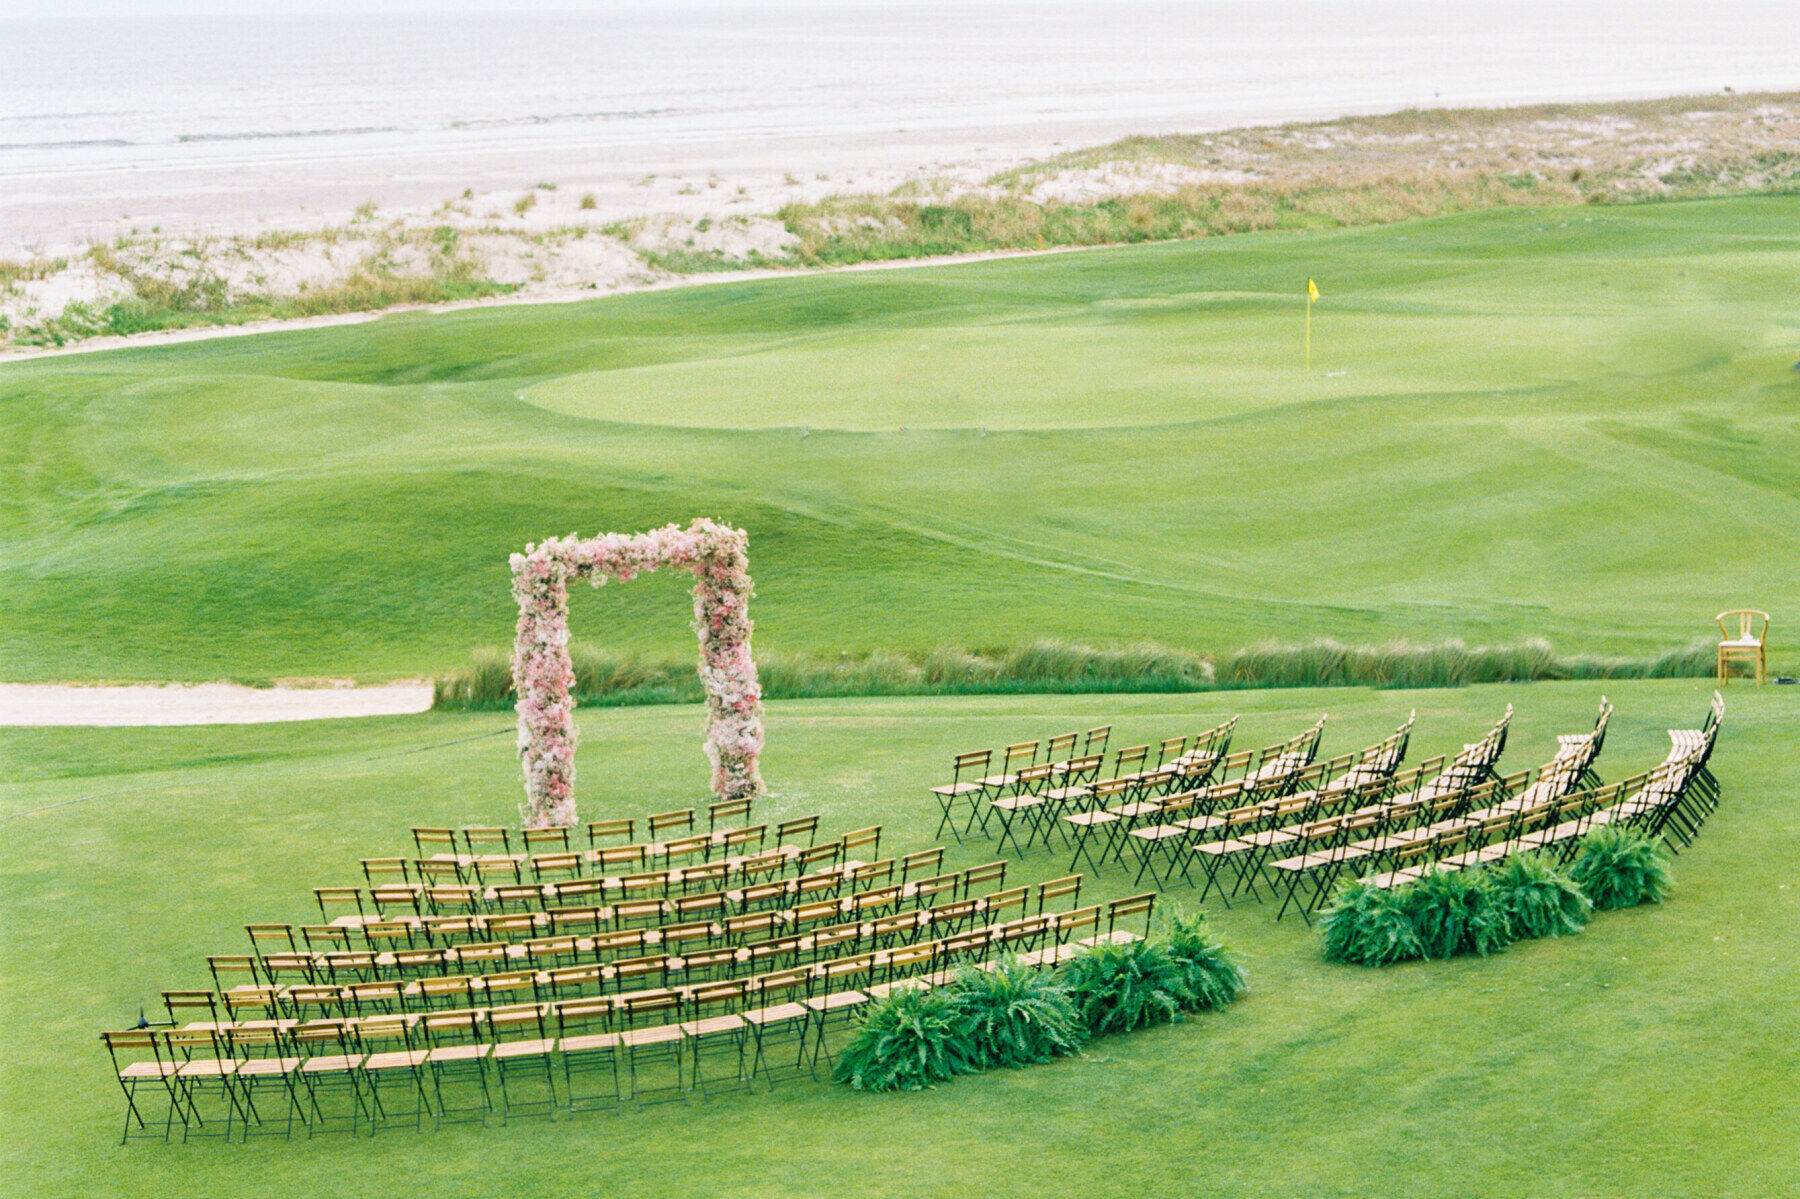 Golf Course Wedding Venues: A wedding ceremony setup with a floral arch and amphitheater-style chairs on a golf course.